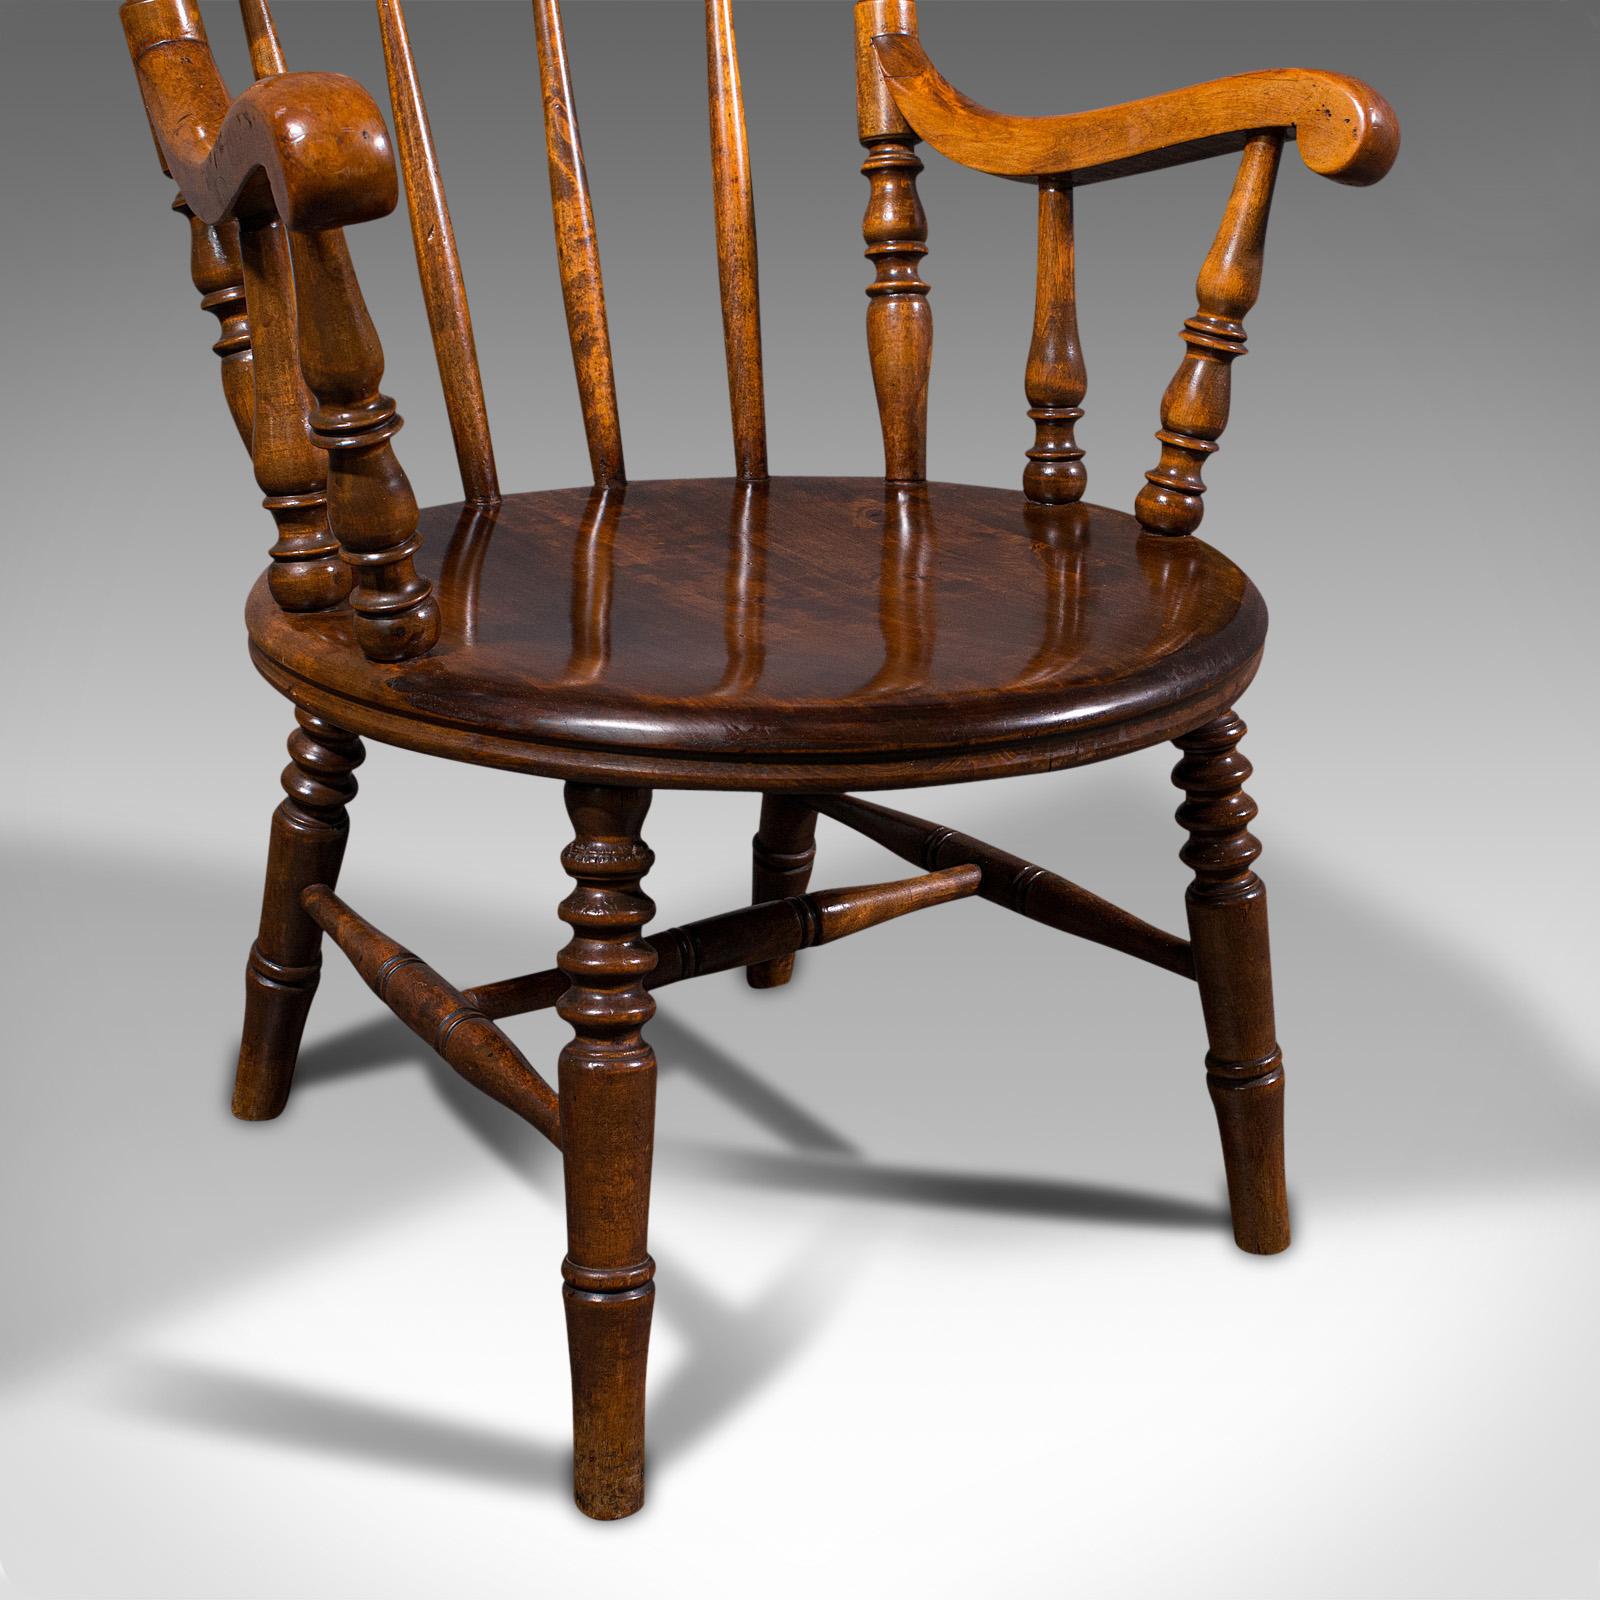 Antique Fireside Elbow Chair, English, Beech, Occasional Seat, Victorian, C.1890 For Sale 7